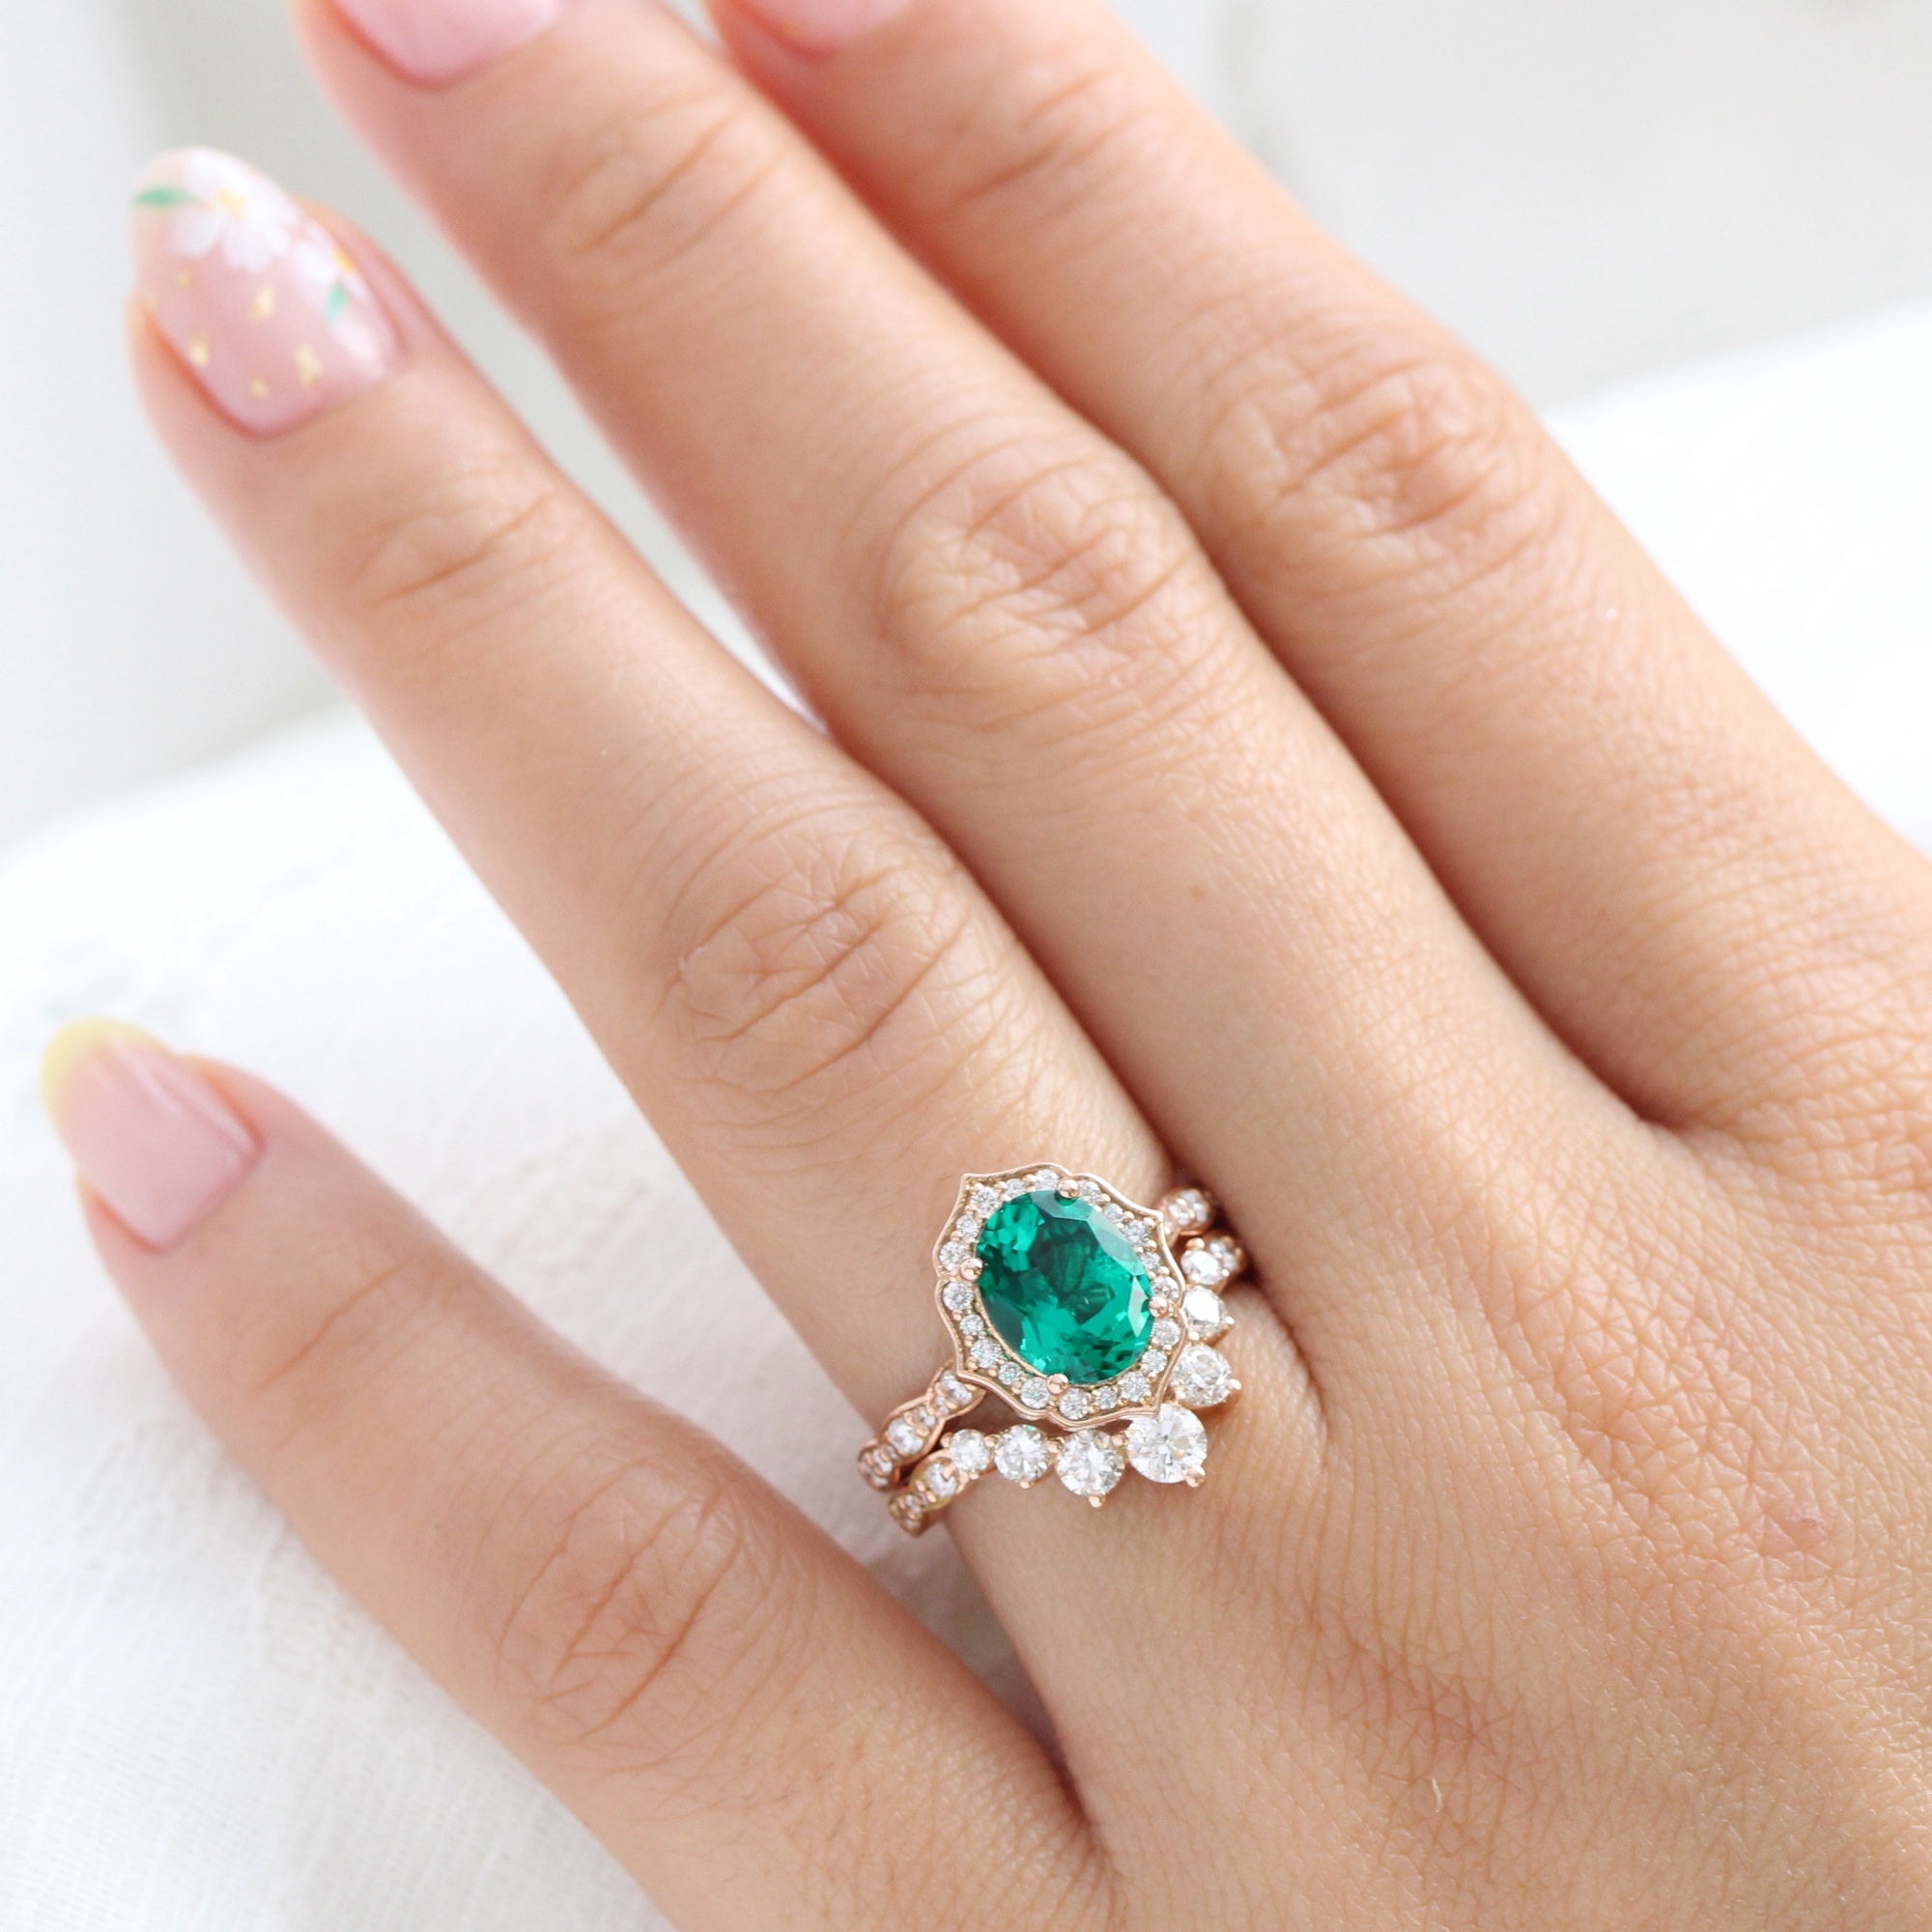 Vintage halo large emerald ring stack rose gold curved diamond wedding band la more design jewelry